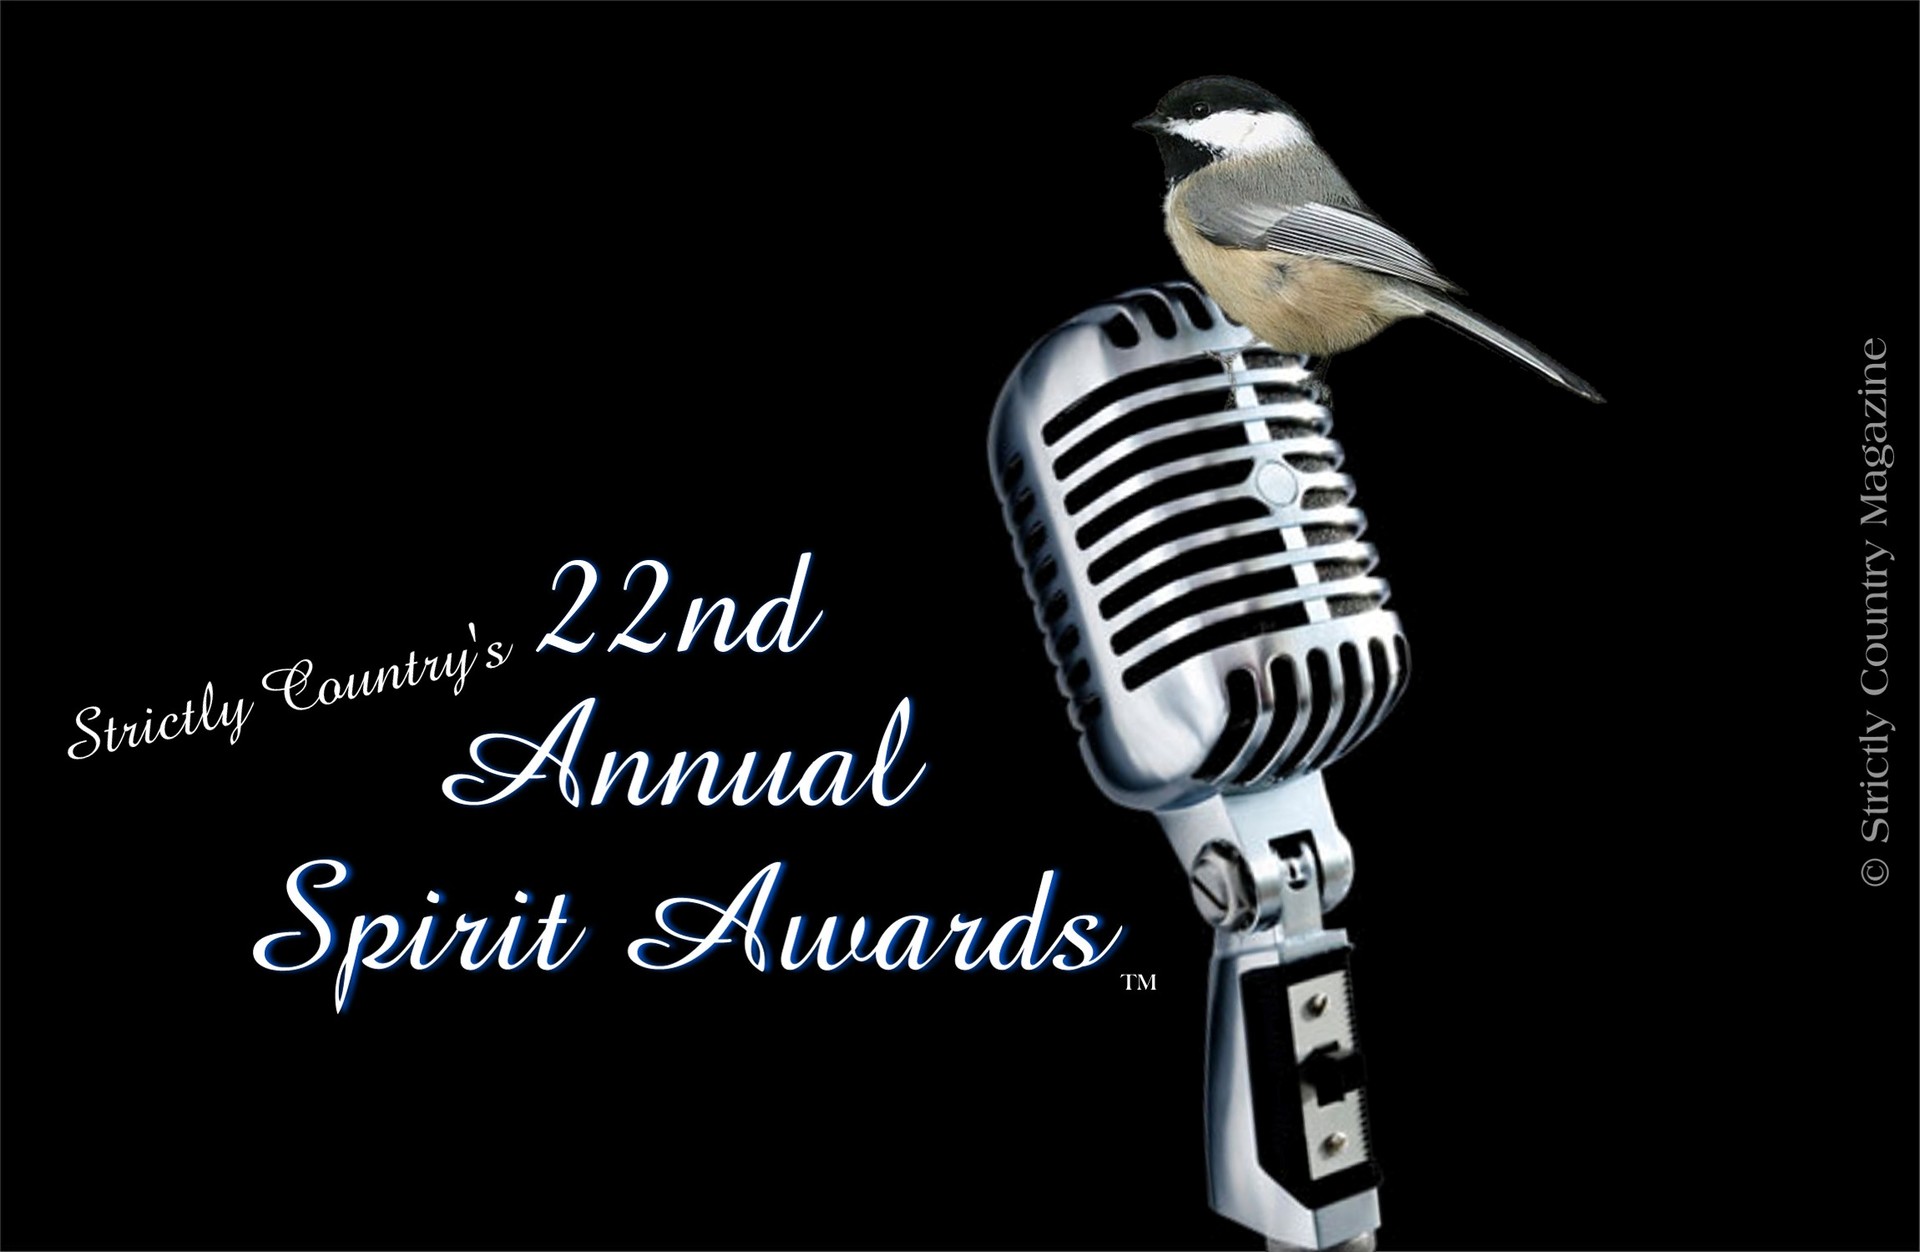 Strictly Country Magazine copyright 22nd Annual Spirit Awards official logo